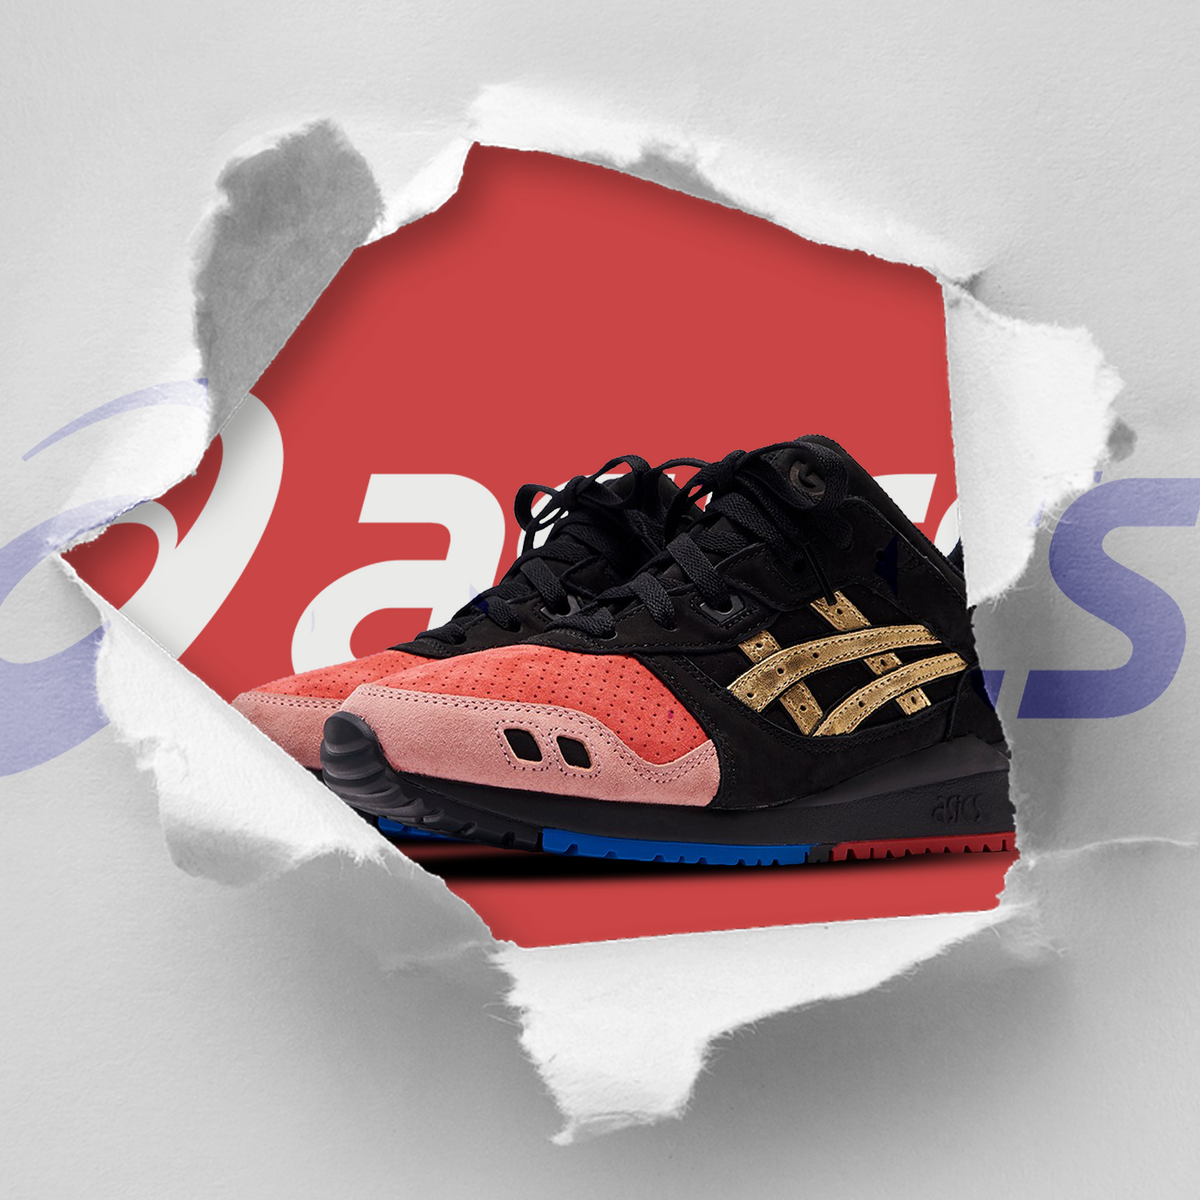 What Is The ASICS Gel-Lyte III?